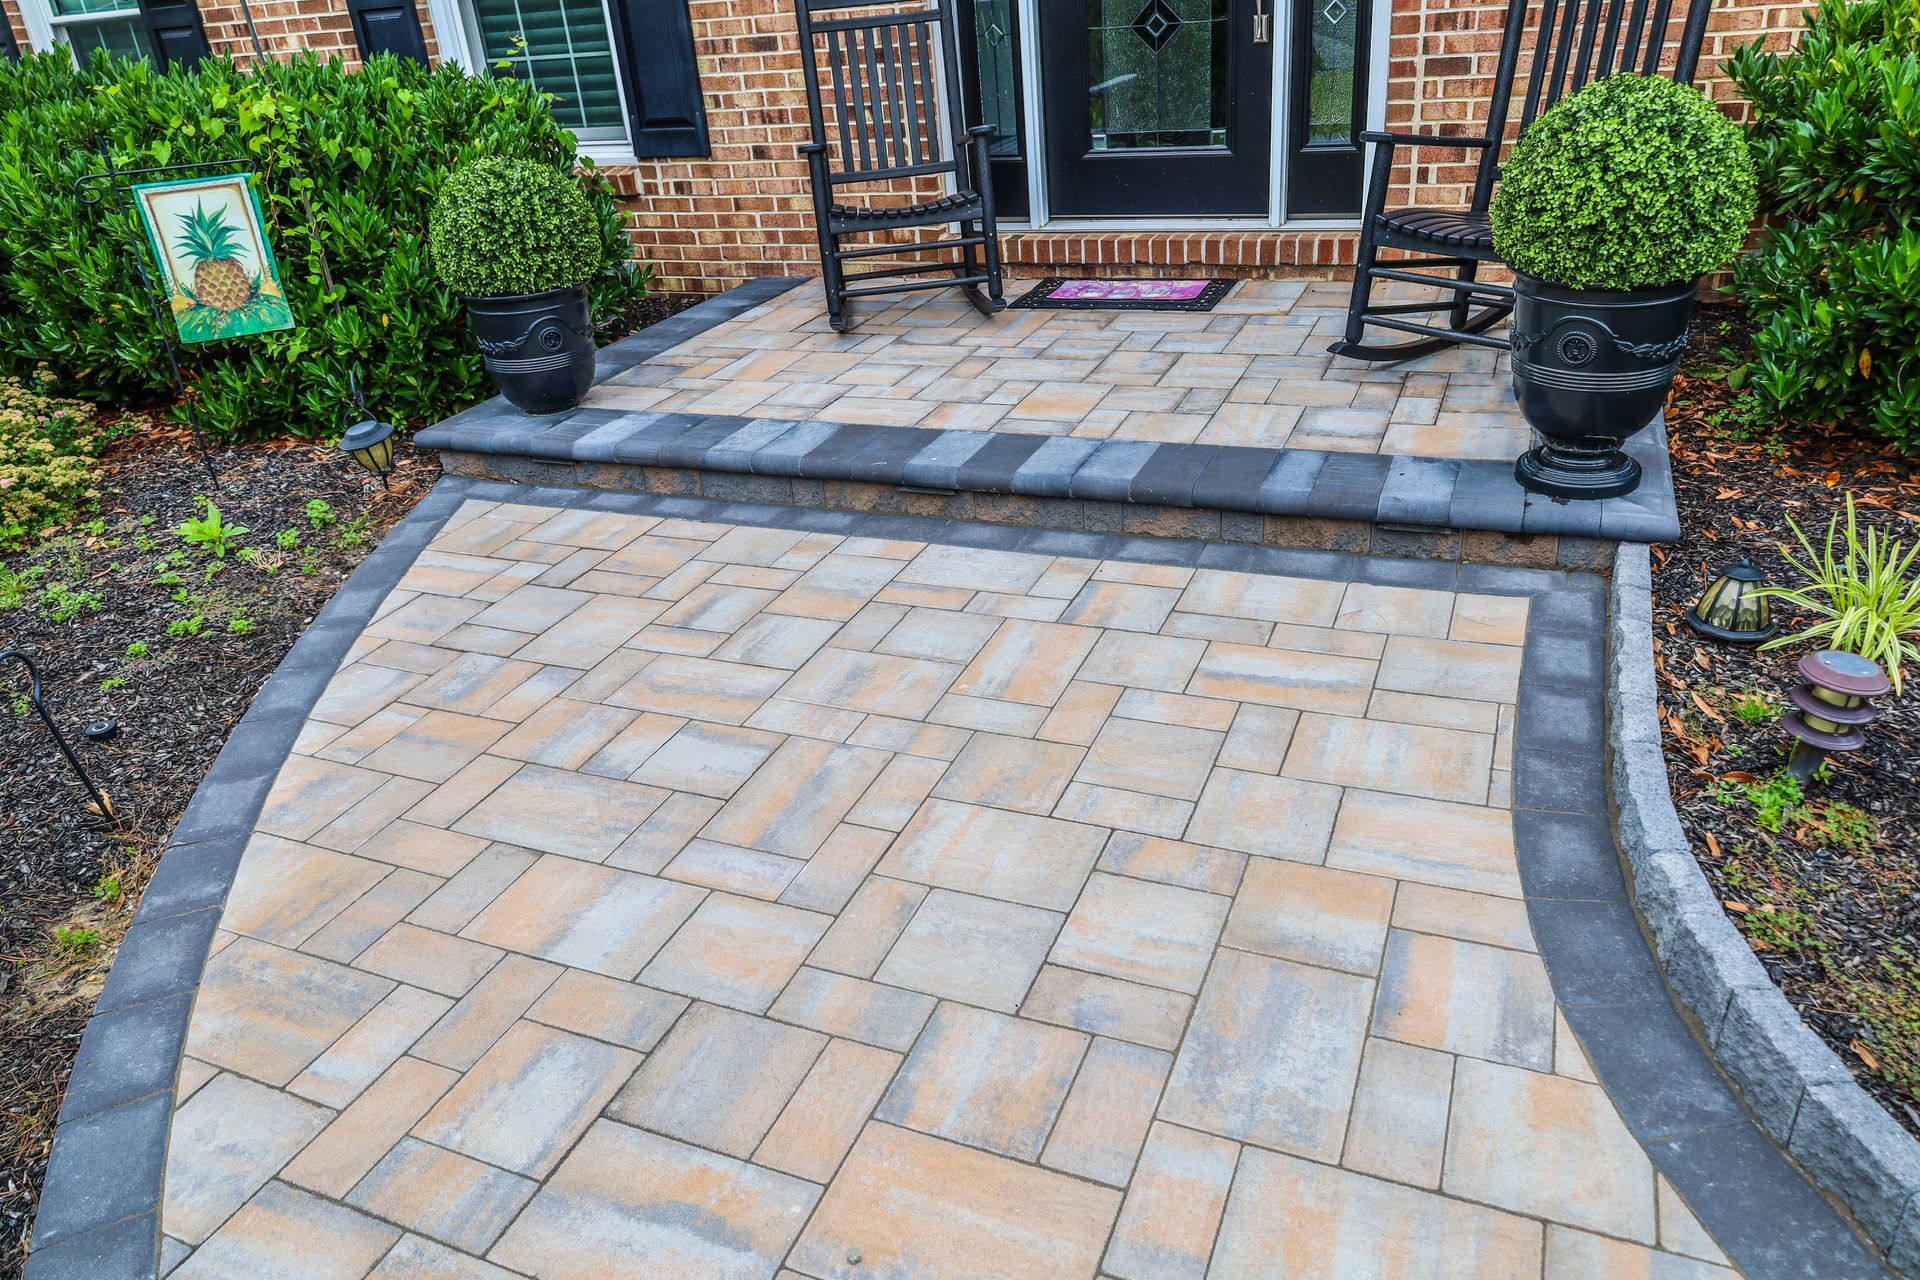 Toffee Onyx Lite with Coal pavers